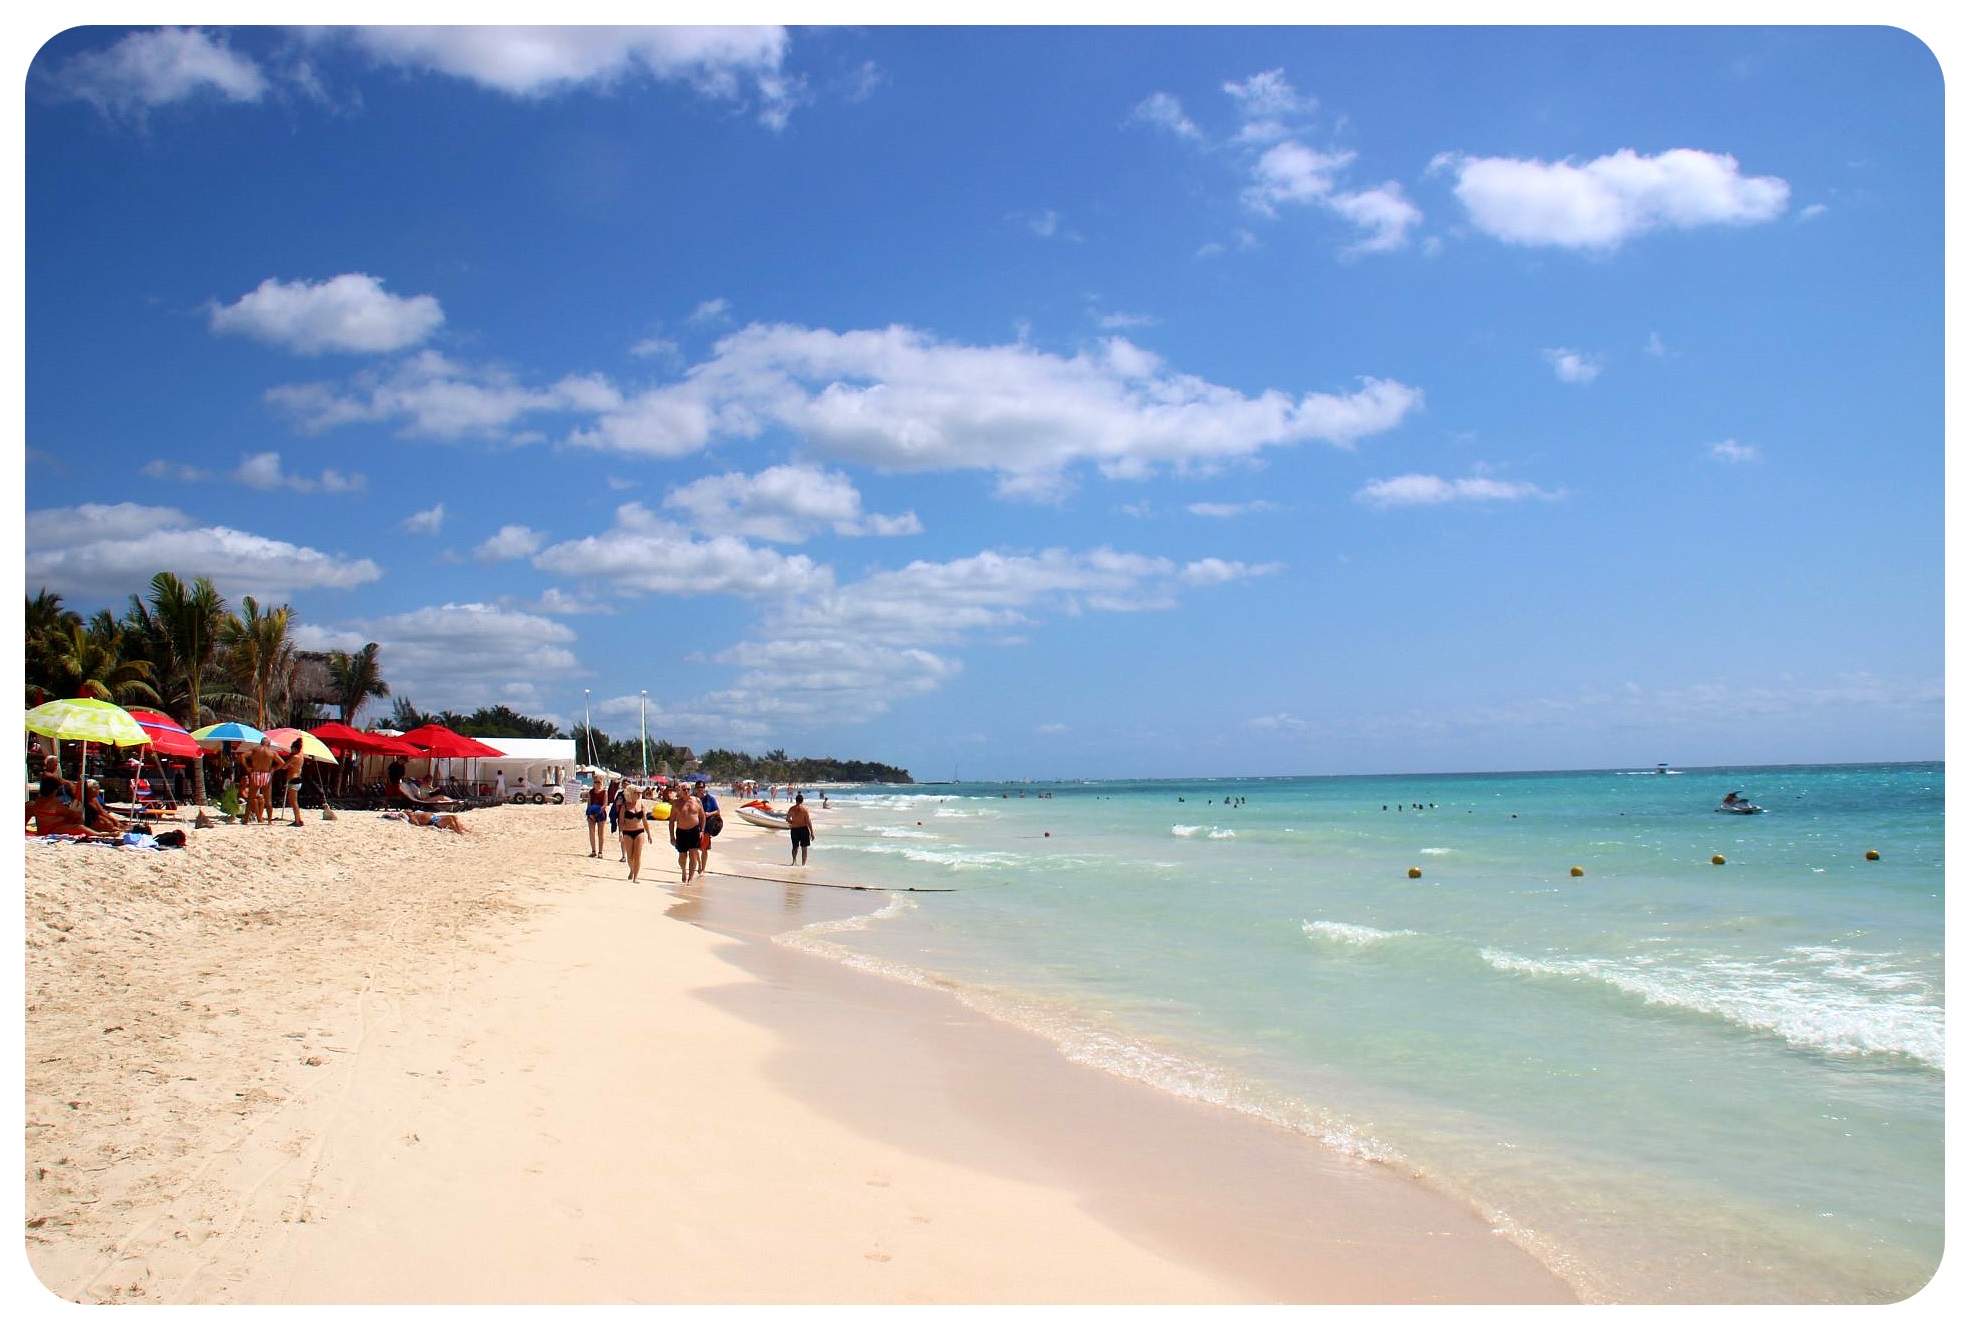 Getting the Most Out of Your Visit to Playa Del Carmen, Mexico